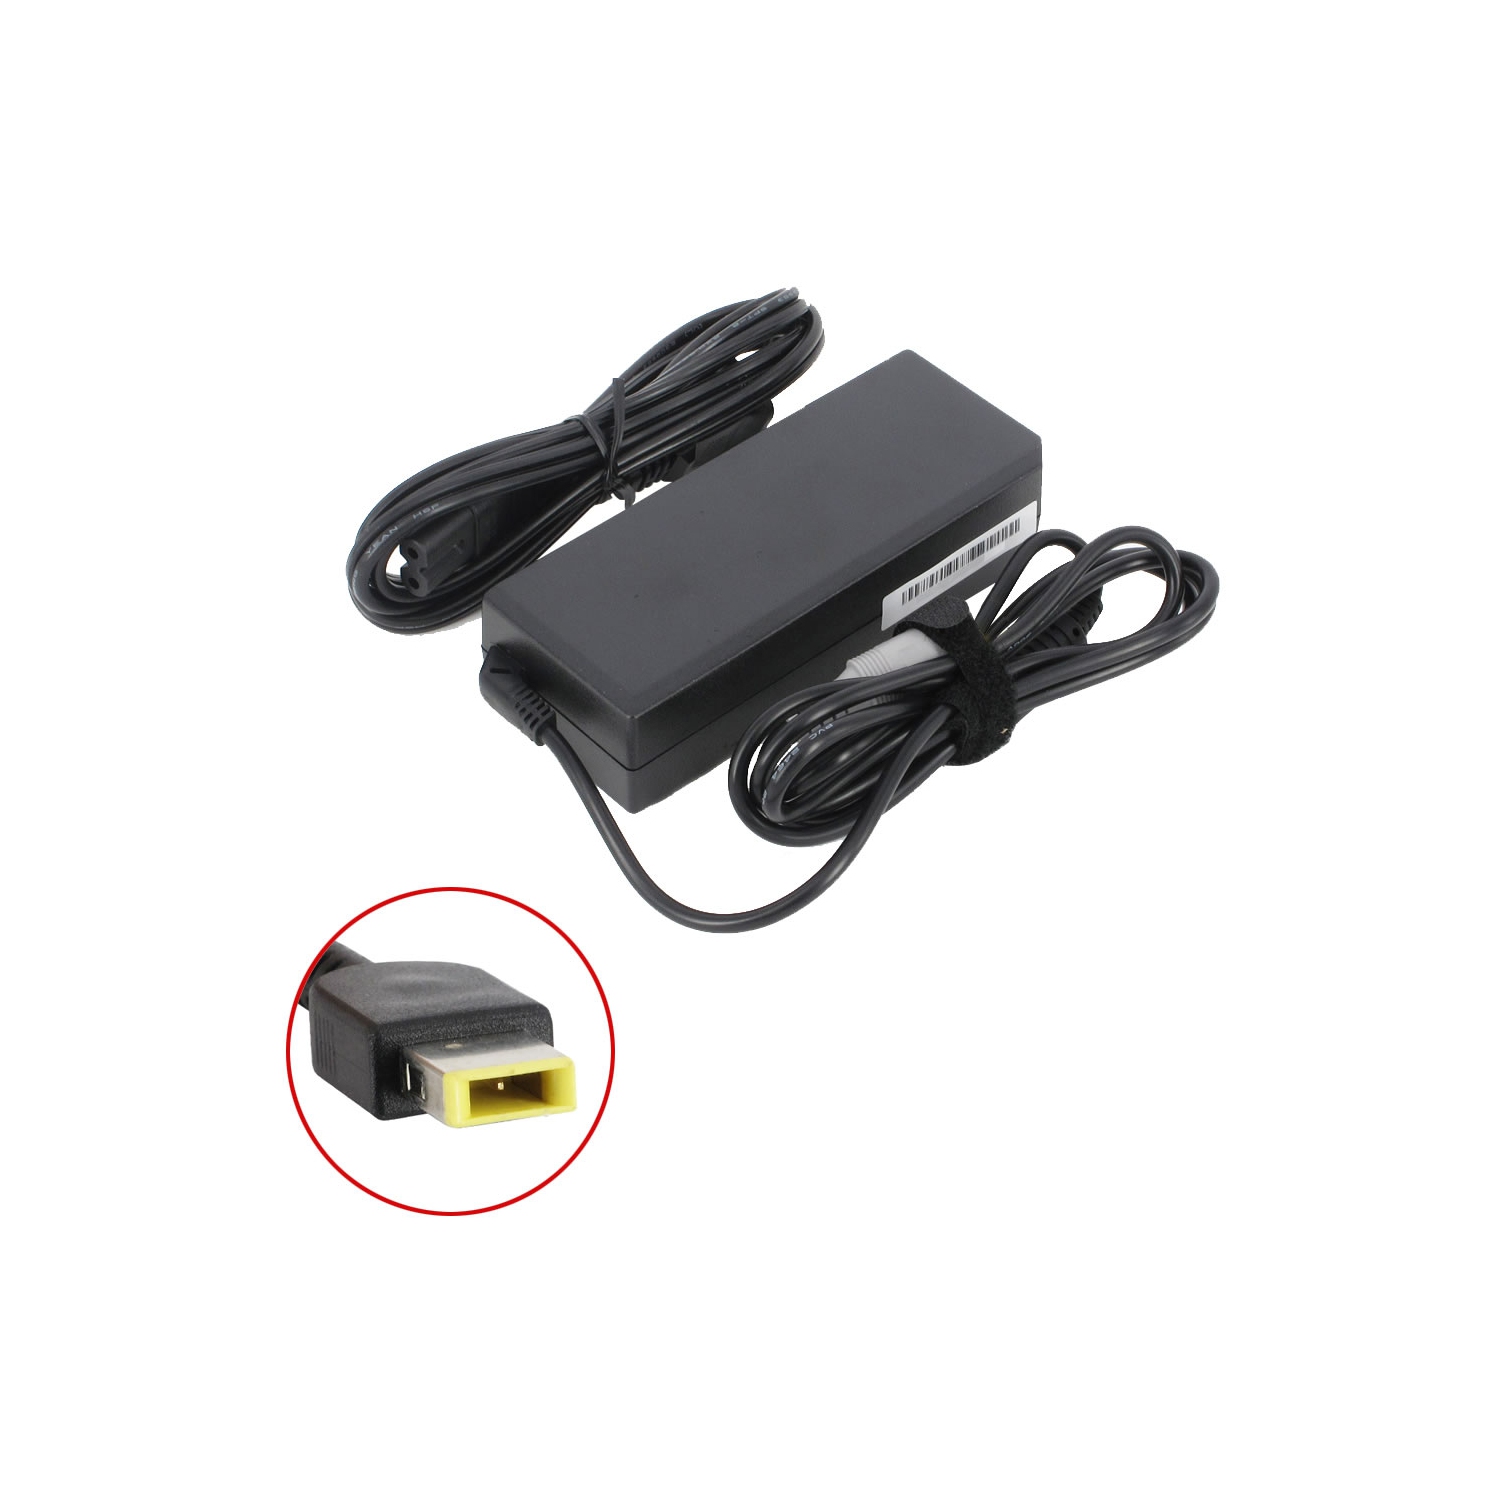 Brand New Laptop AC Adapter for Lenovo IdeaPad 300-17ISK 80QH, 0B47455, 45N0247, ADLX45NDC3A, ADLX65NLC3A, 36200235